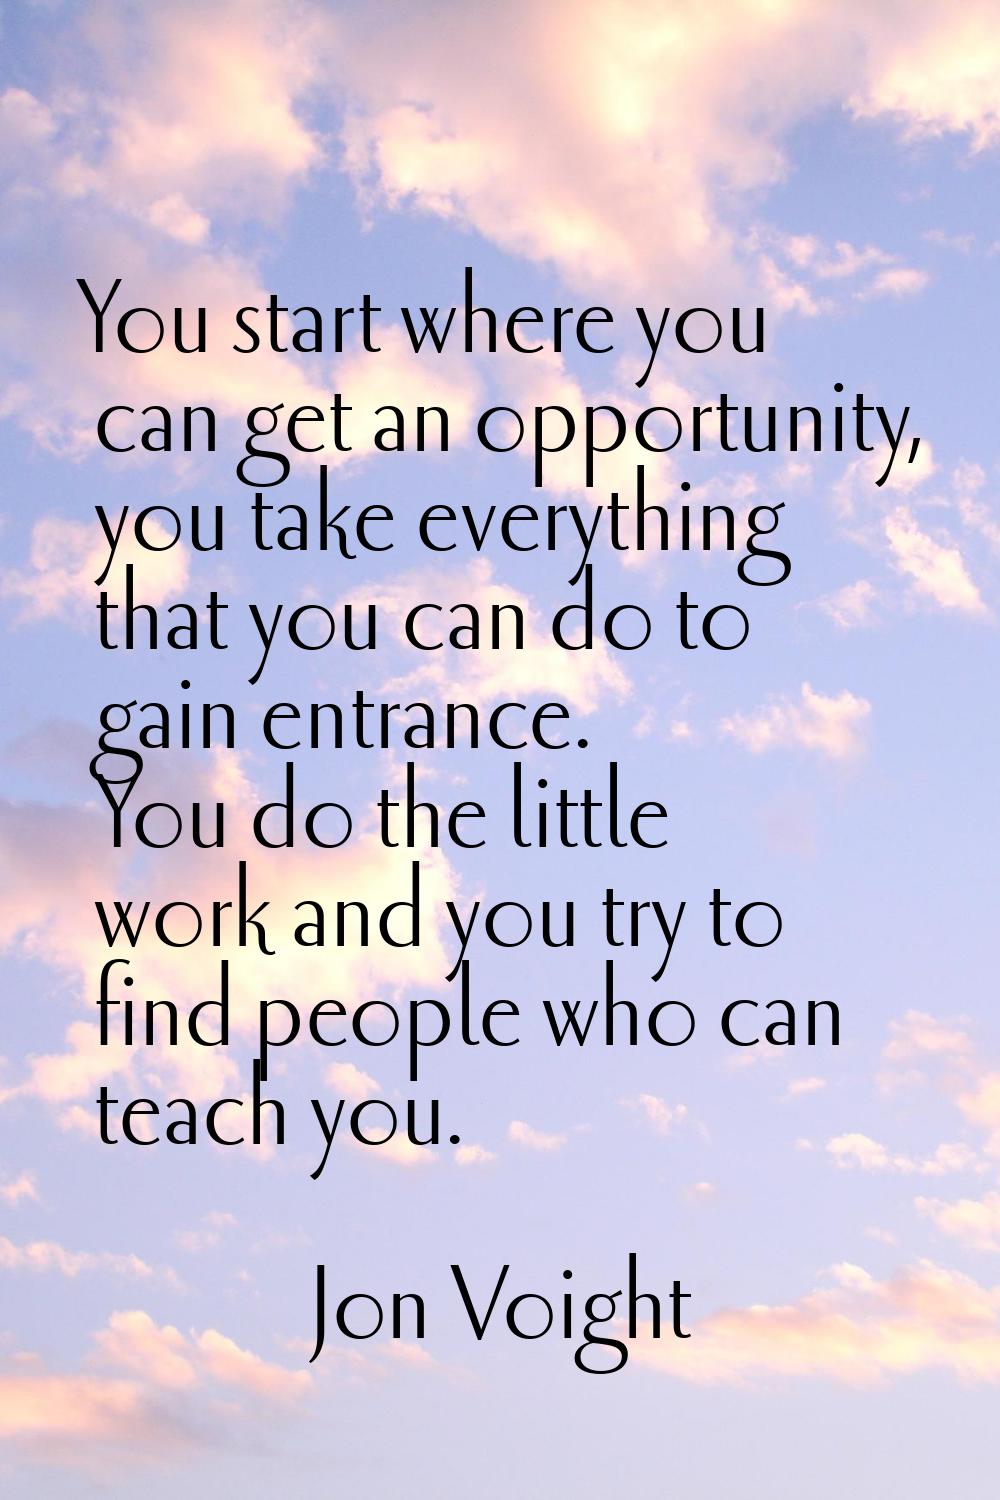 You start where you can get an opportunity, you take everything that you can do to gain entrance. Y